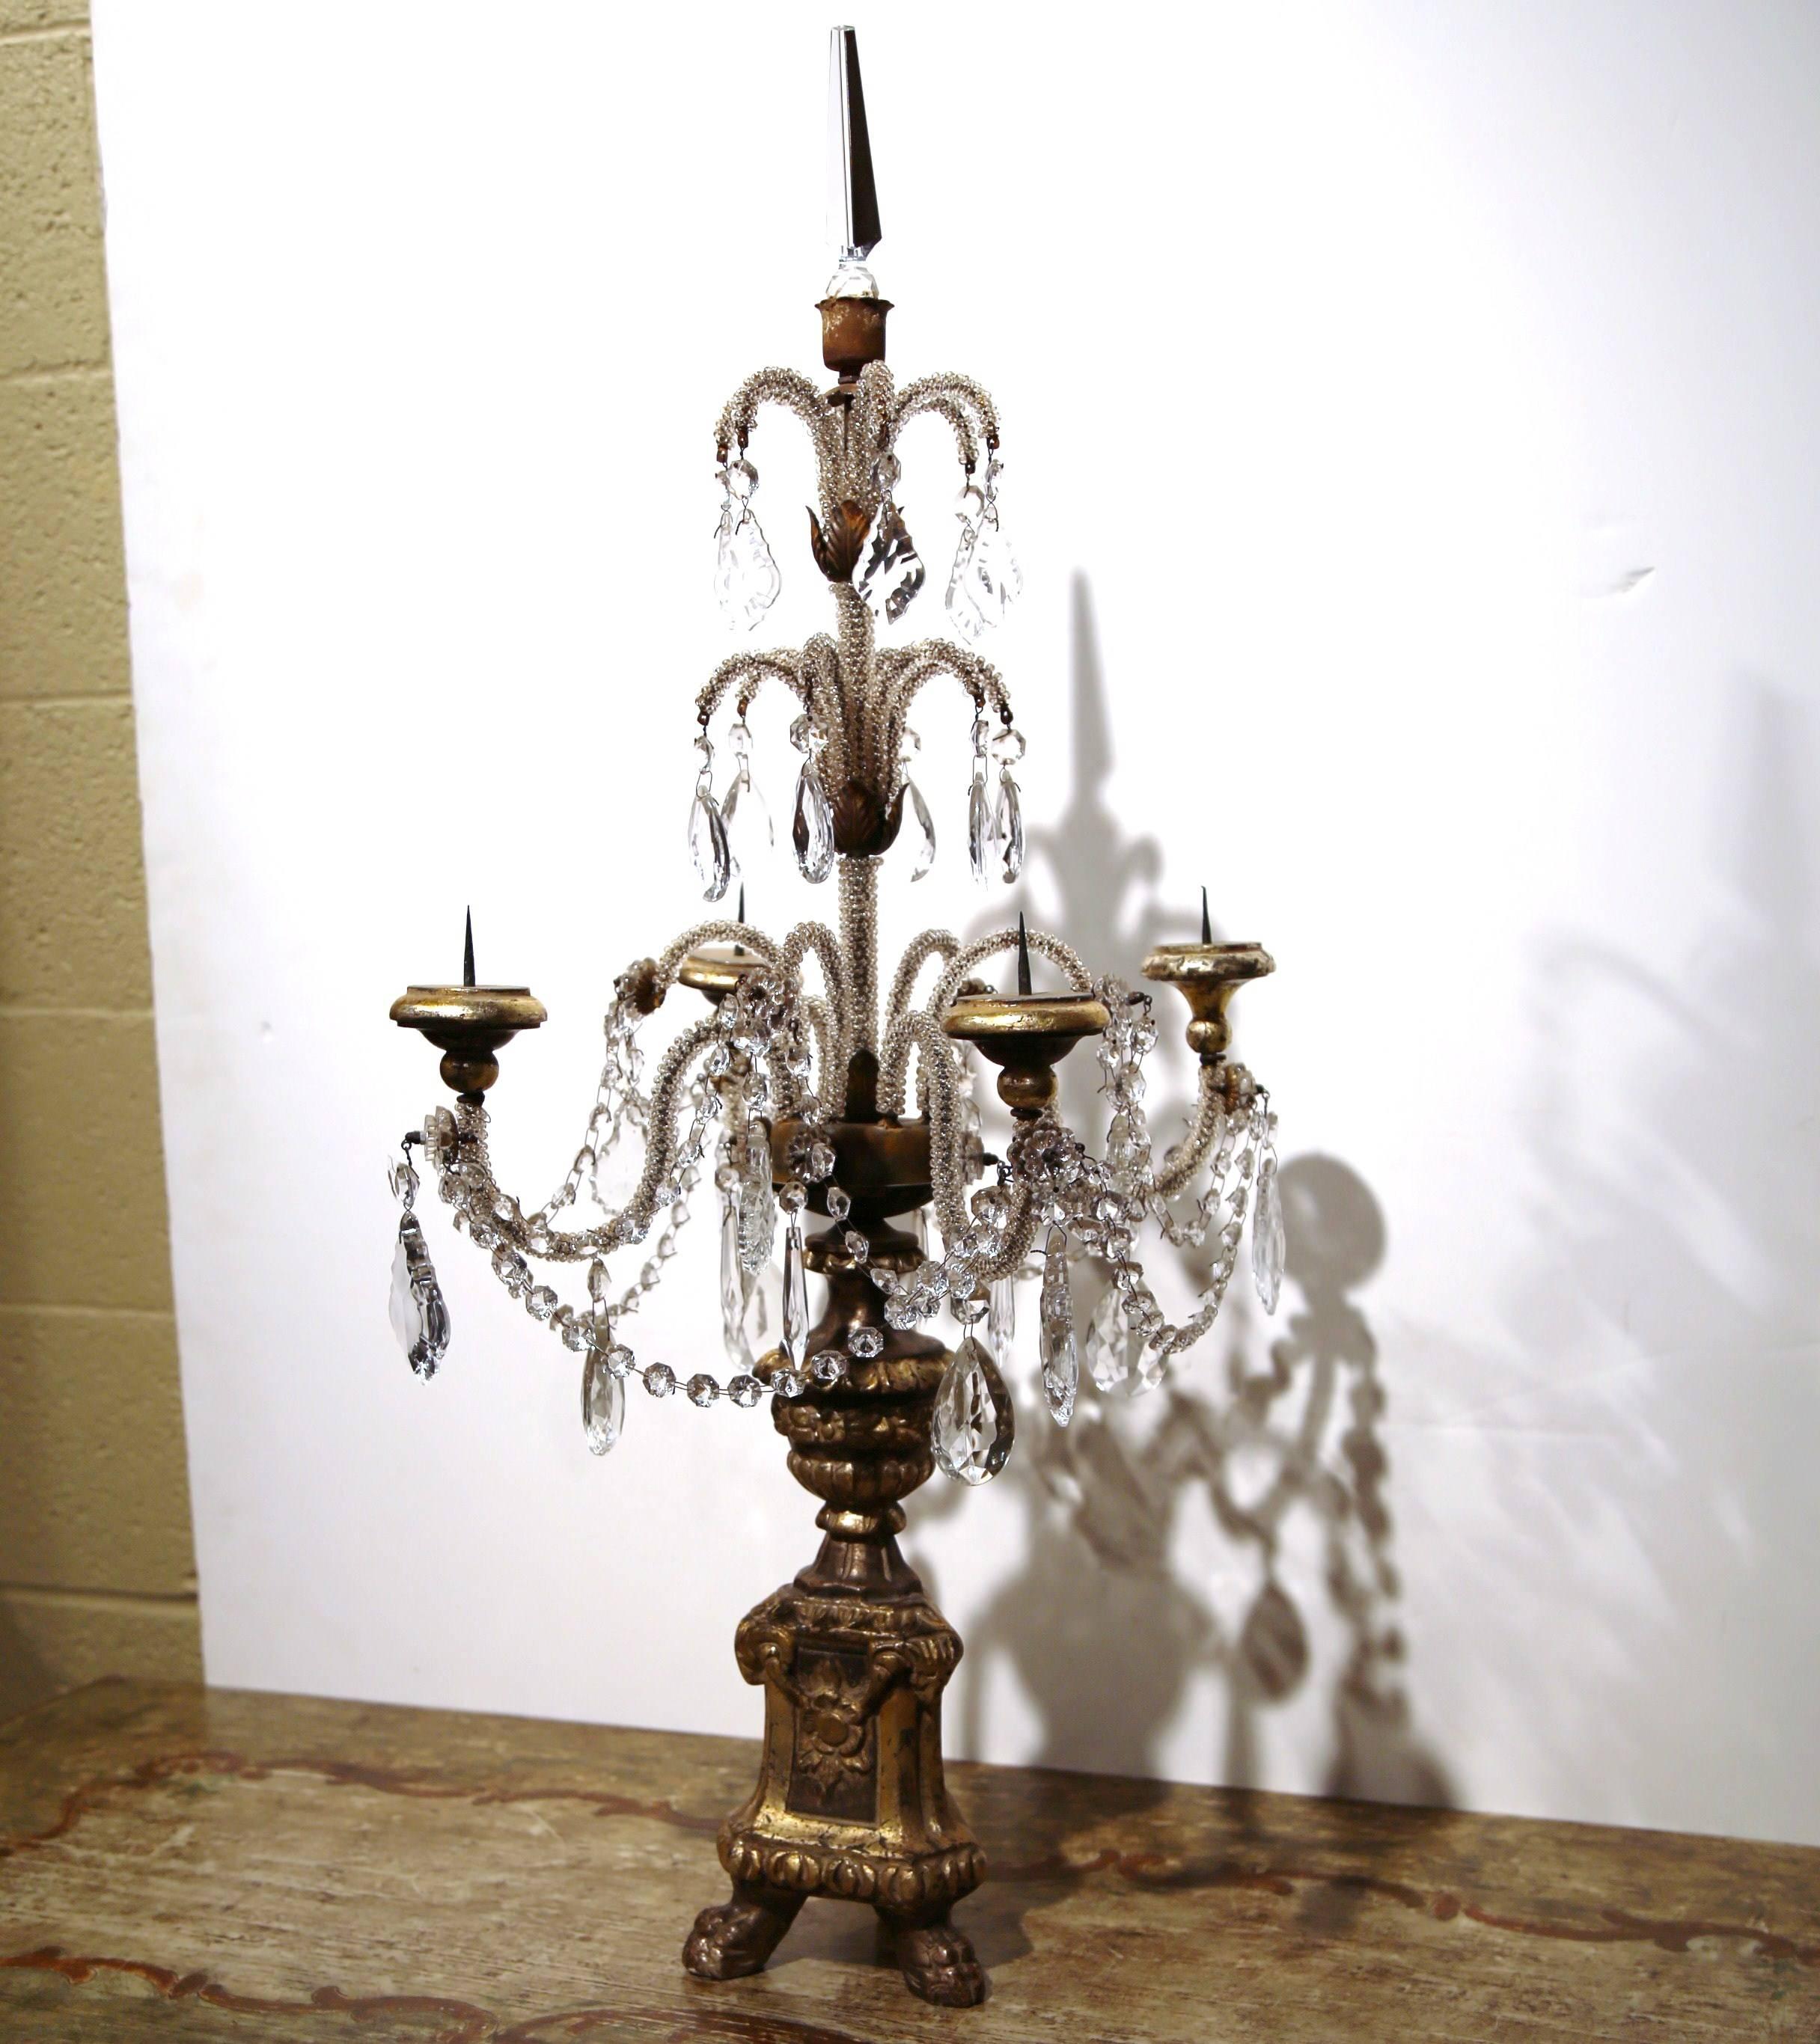 This delicate pair of candelabras was created in Italy, circa 1920. The elegant candle holders each have four arms with crystal and cut-glass pendants, gold leaf finish on the giltwood carved base with small feet, and a decorative glass finial to